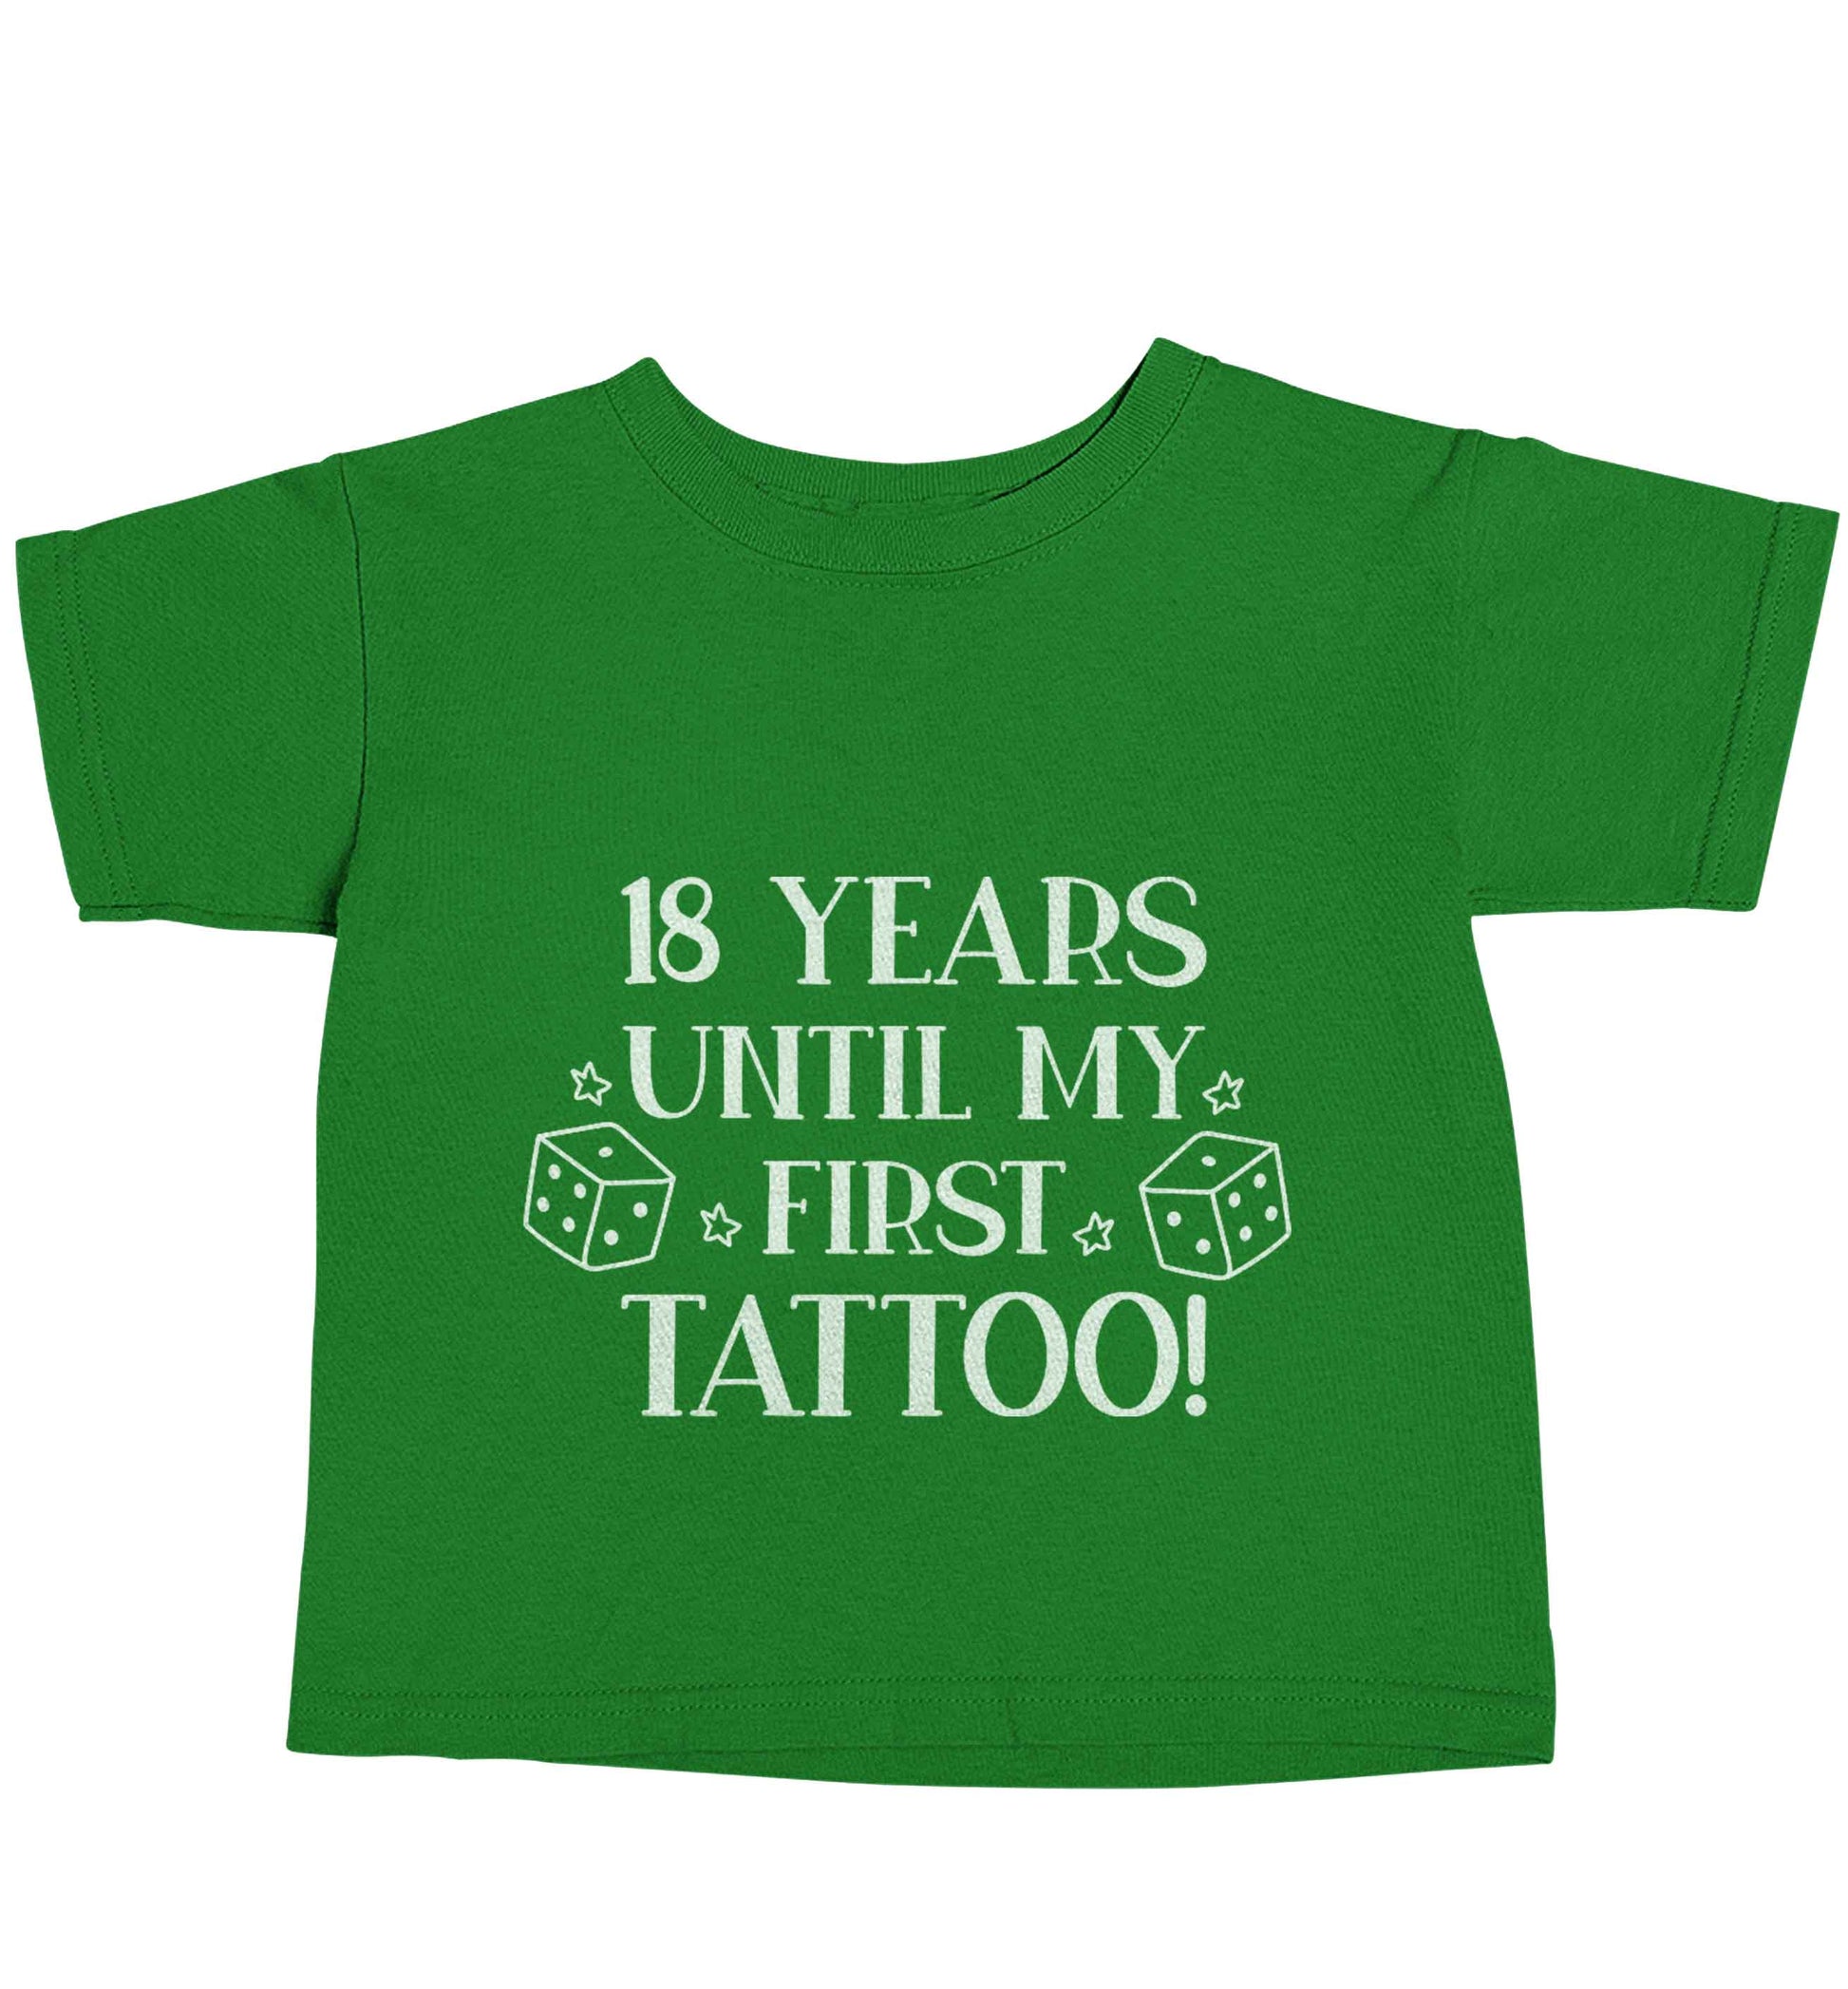 18 Years Until my First Tattoo green baby toddler Tshirt 2 Years